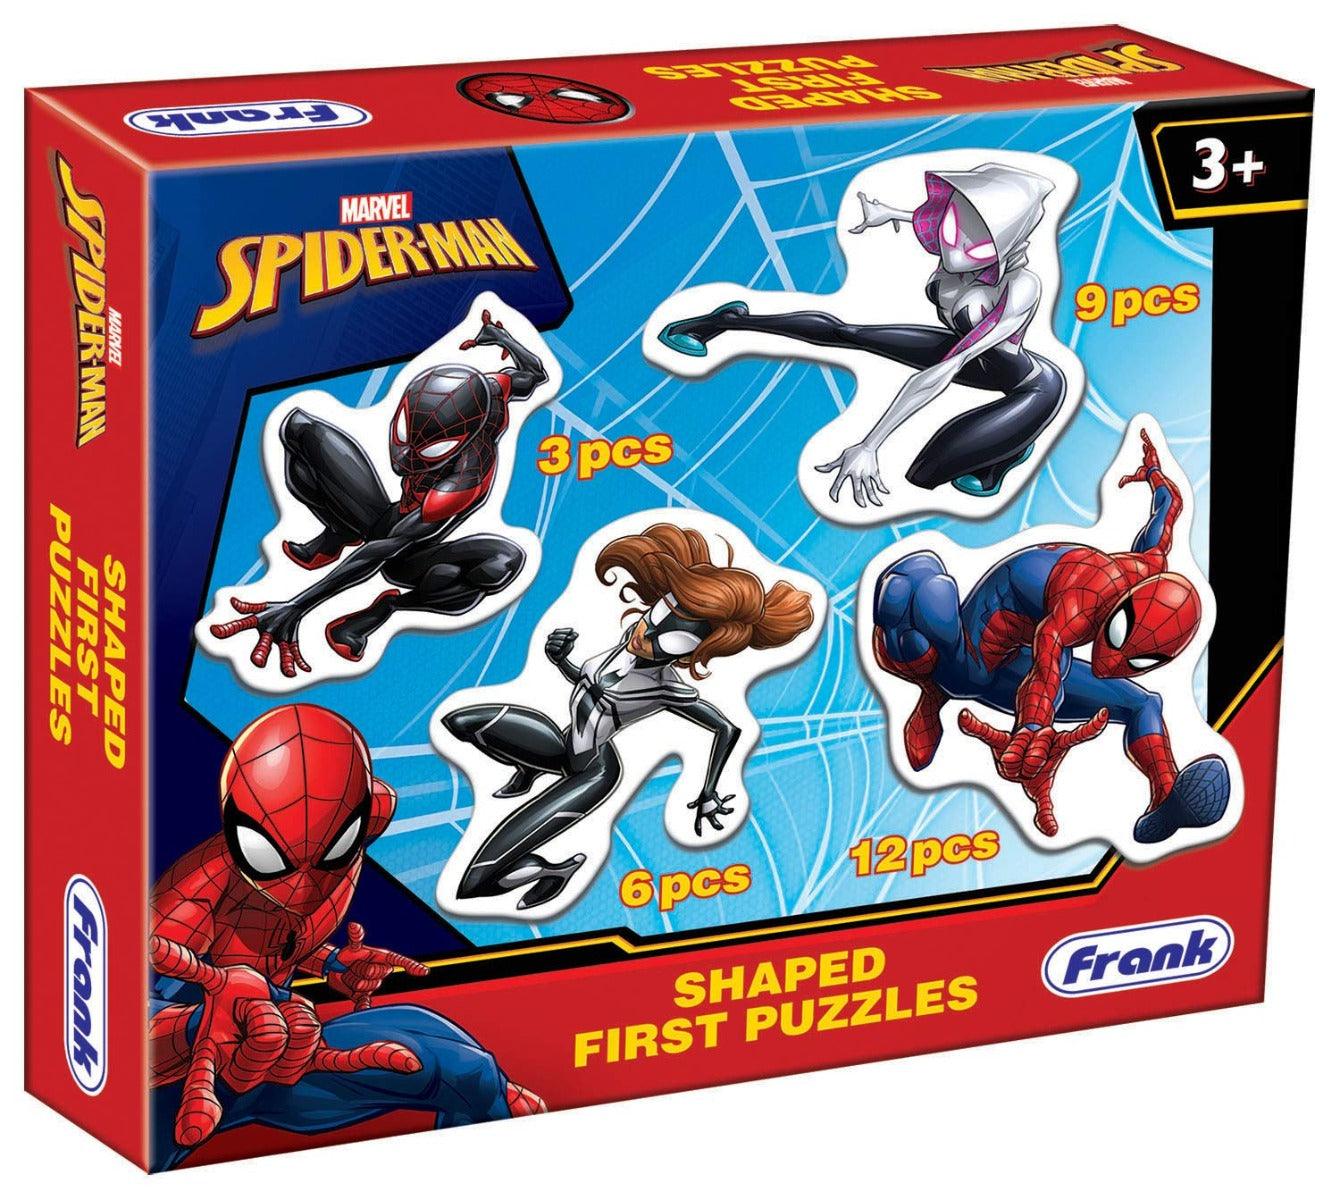 Frank Marvel's Spider-Man - Shaped First Puzzles Puzzle for 3 Year Old Kids and Above